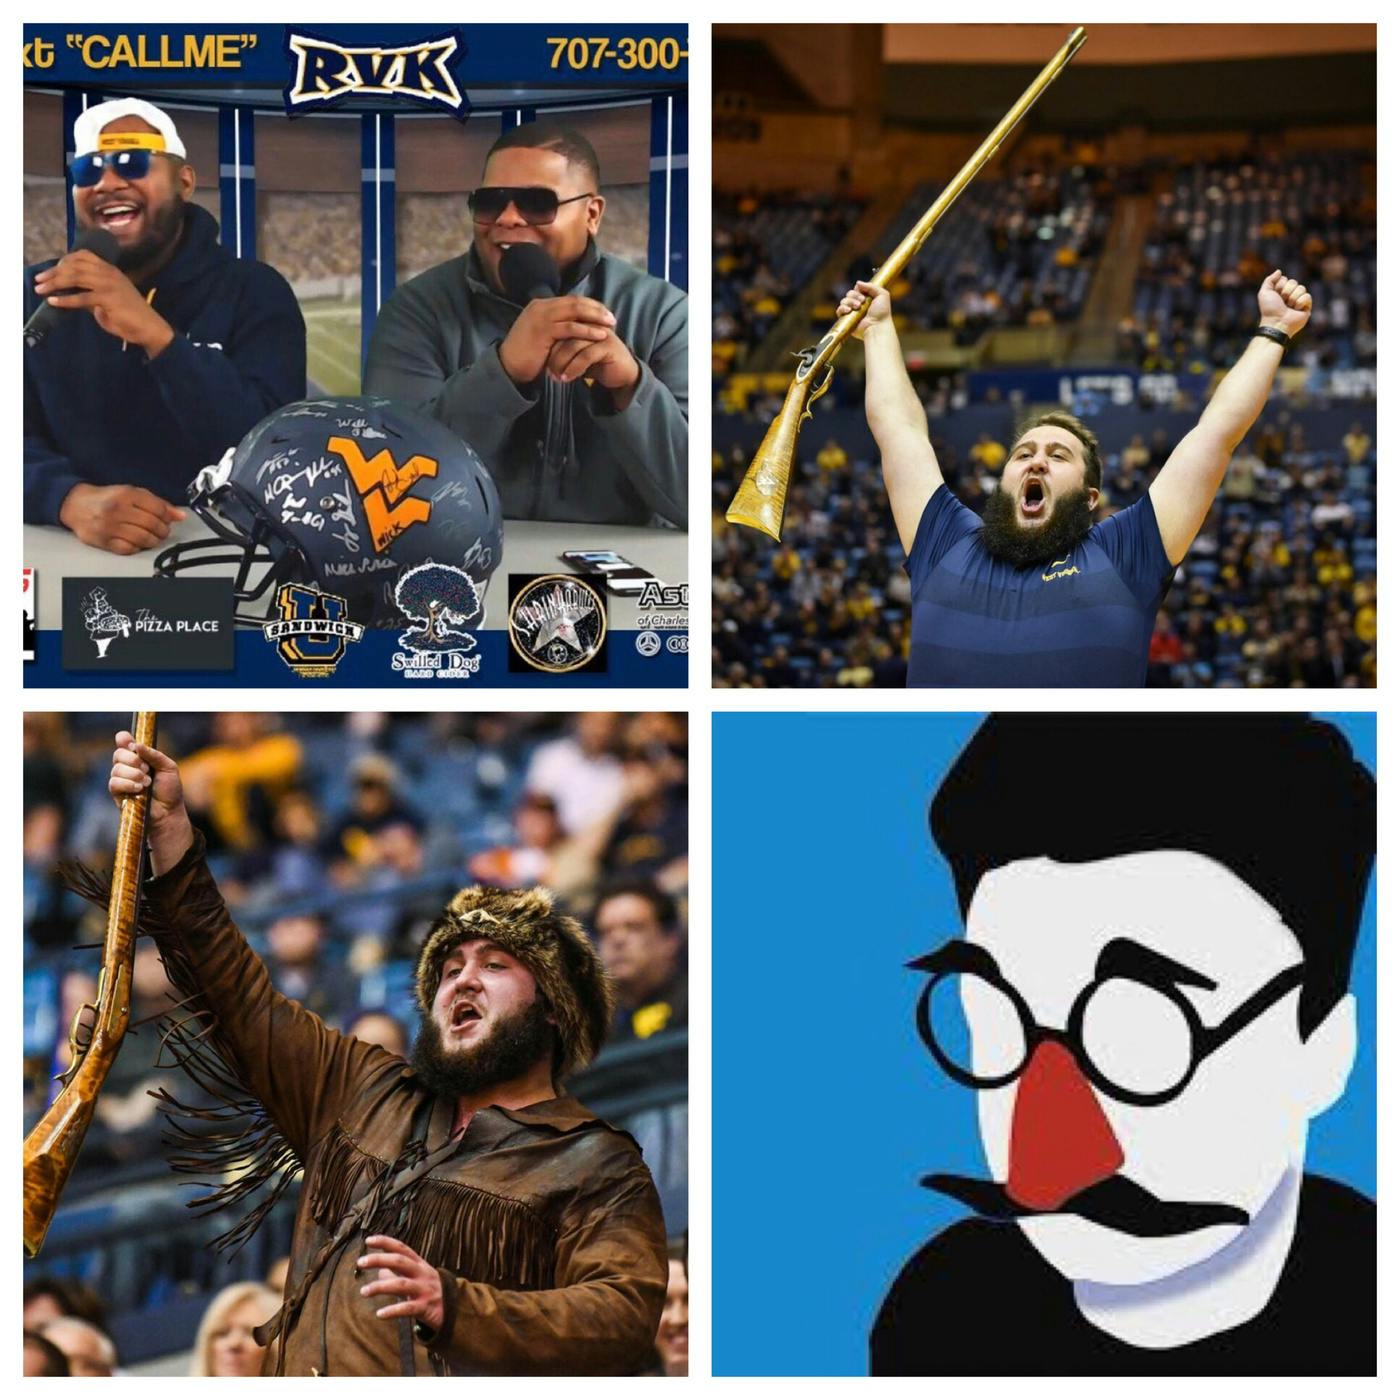 Ep.104 - New Mountaineer Mascot, Timmy Eads - Gold and Blue Interview